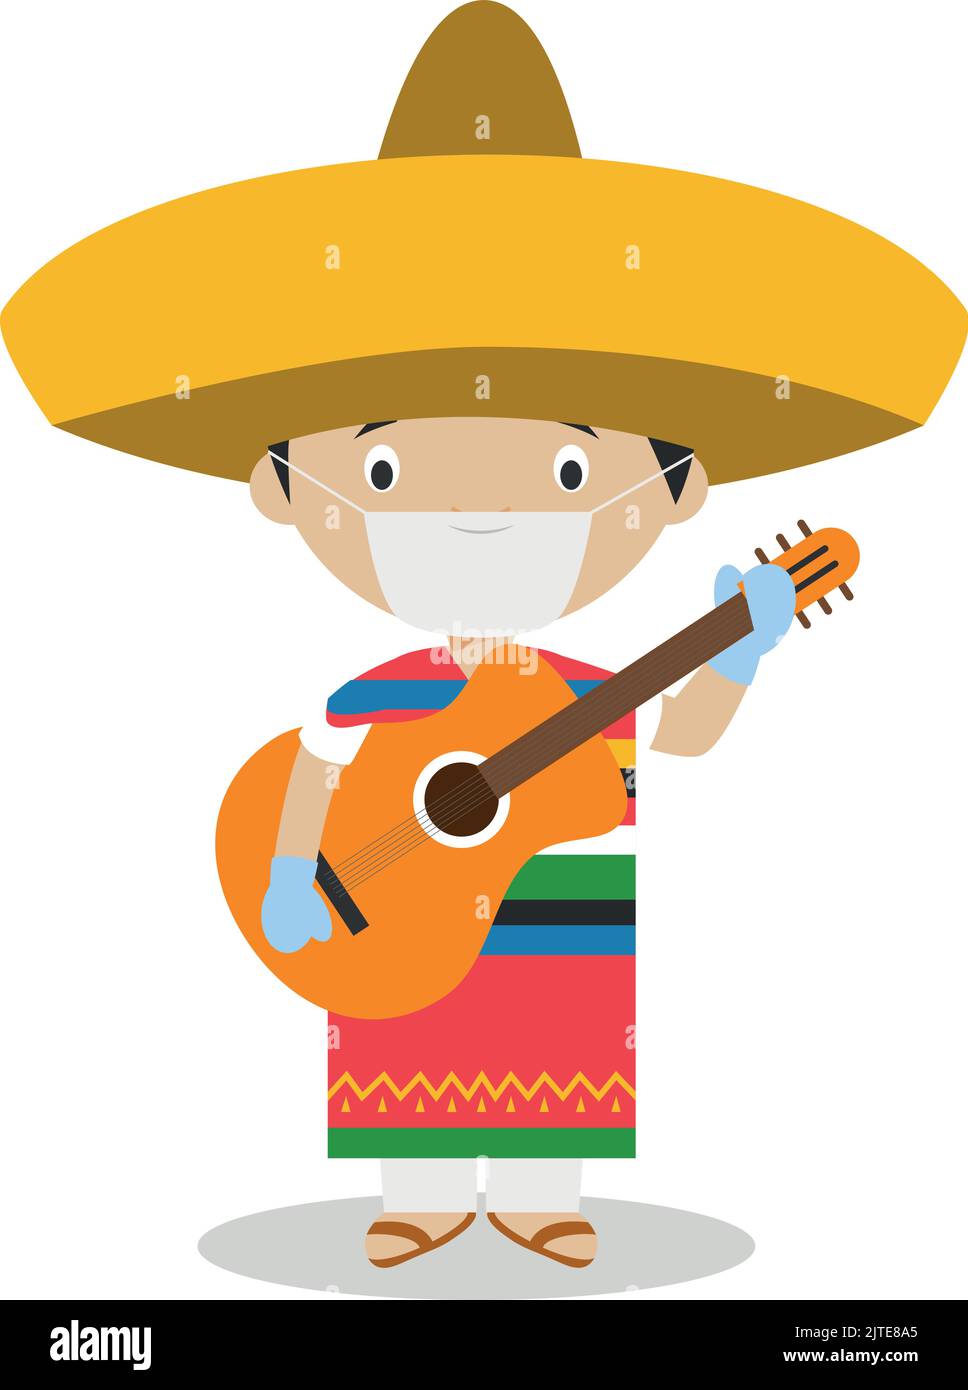 Character from Mexico dressed in the traditional way with guitar and with surgical mask and latex gloves as protection against a health emergency Stock Vector